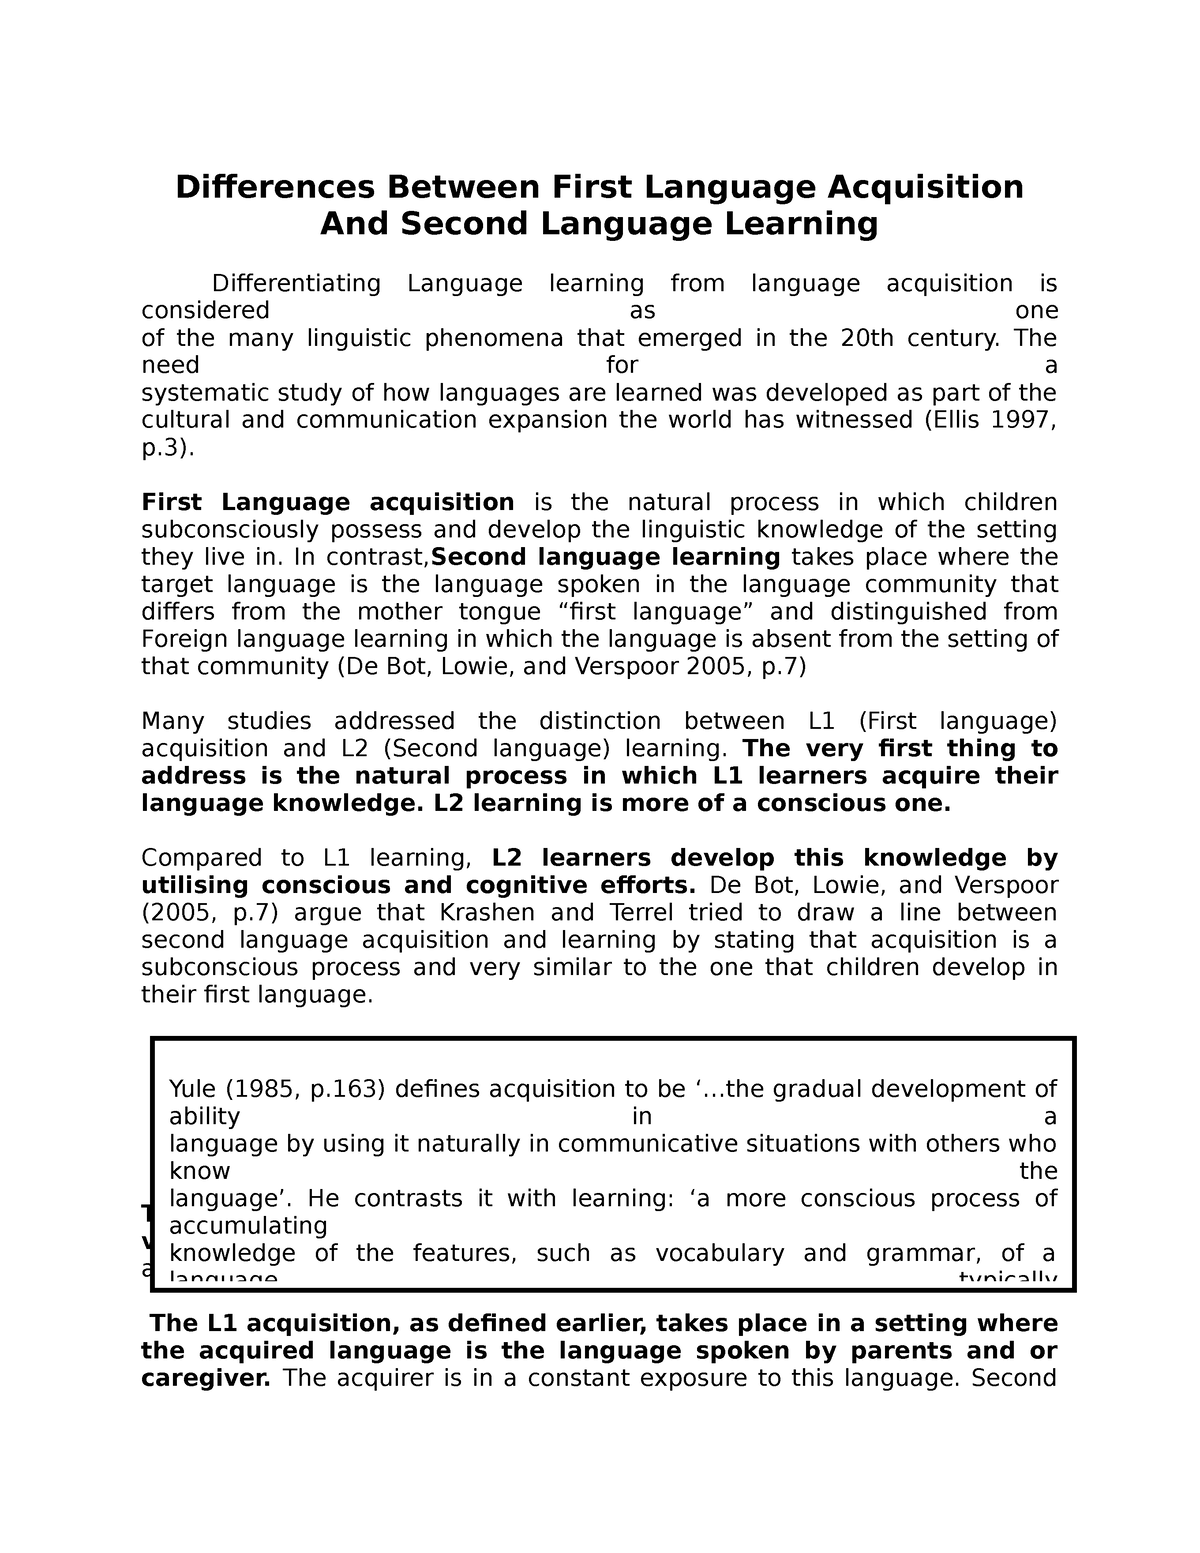 essay about first language acquisition